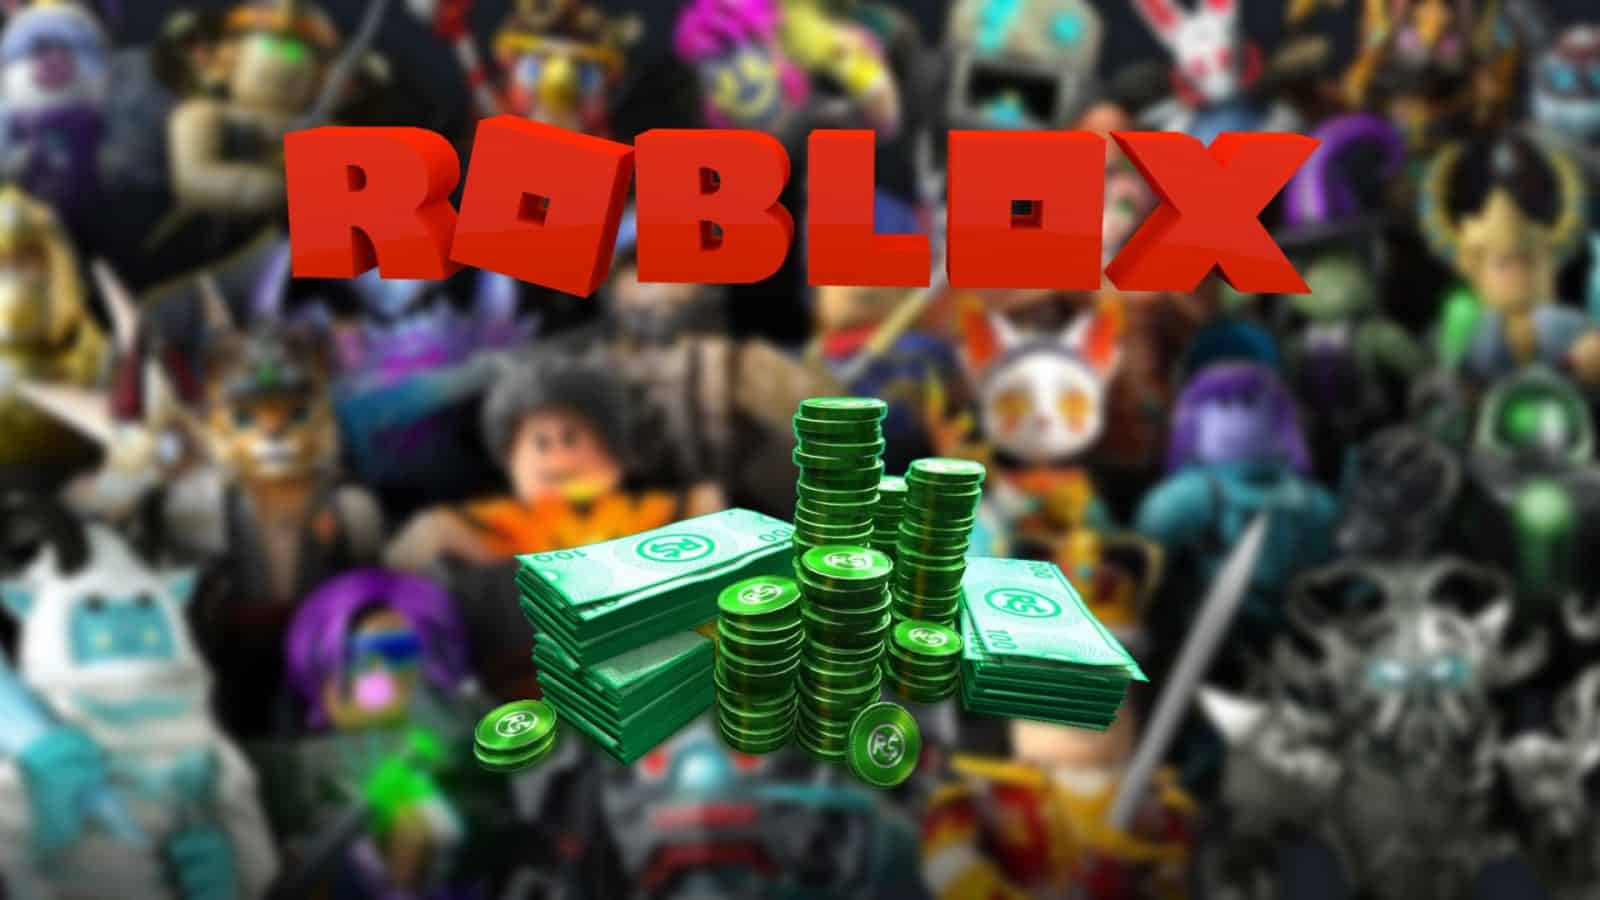 Getting my stolen roblox account back! You can too! (ROBLOX